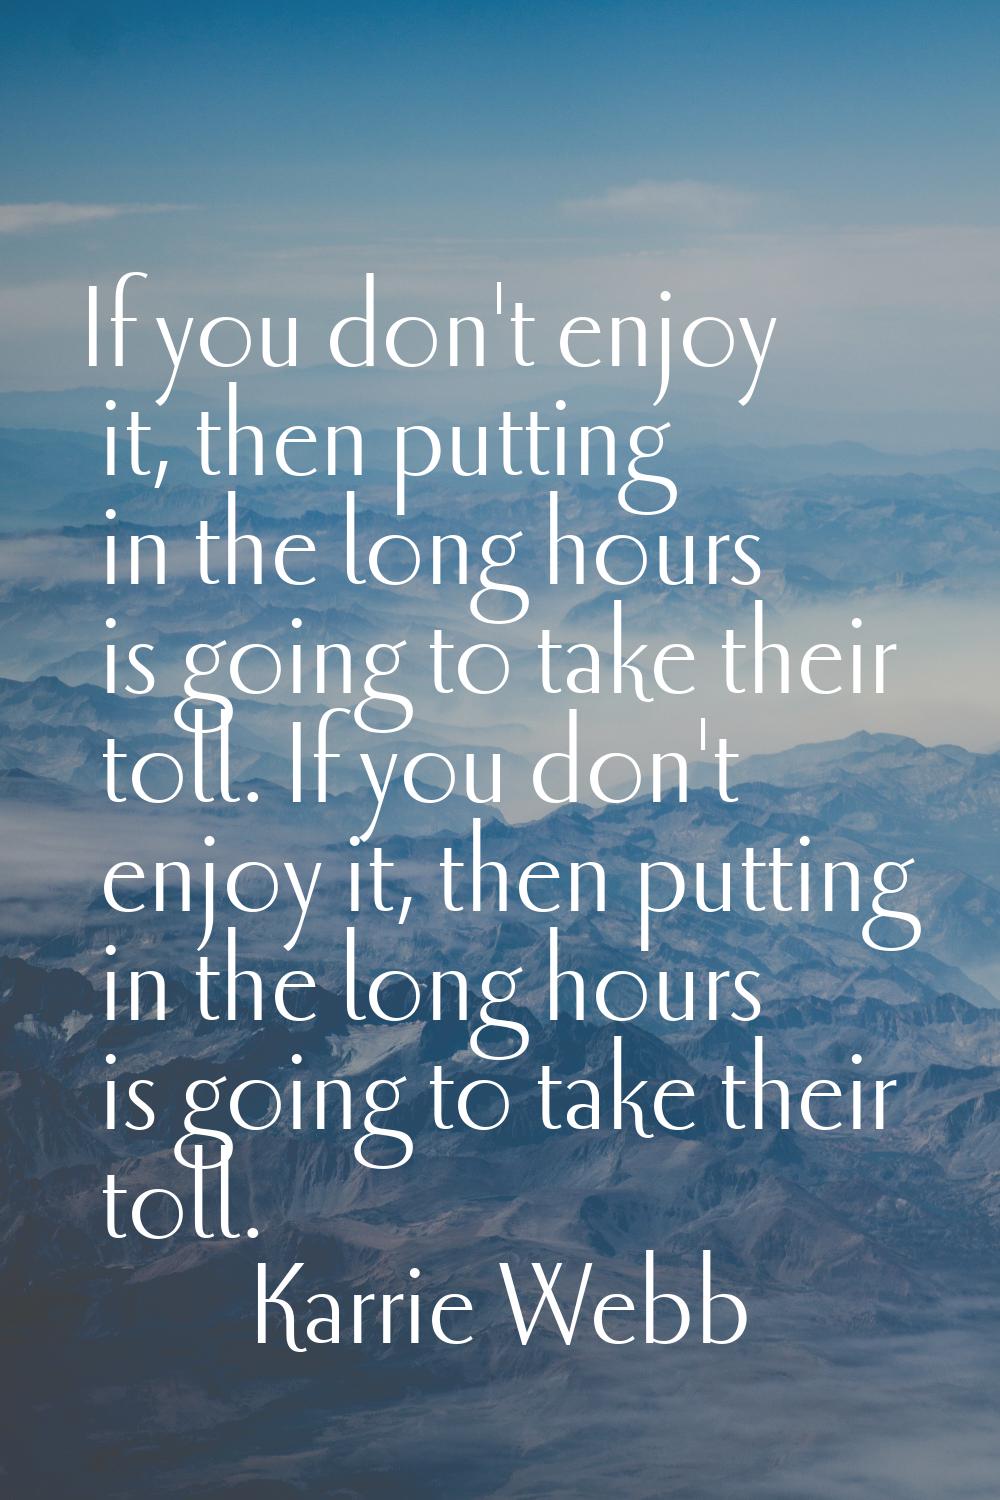 If you don't enjoy it, then putting in the long hours is going to take their toll. If you don't enj